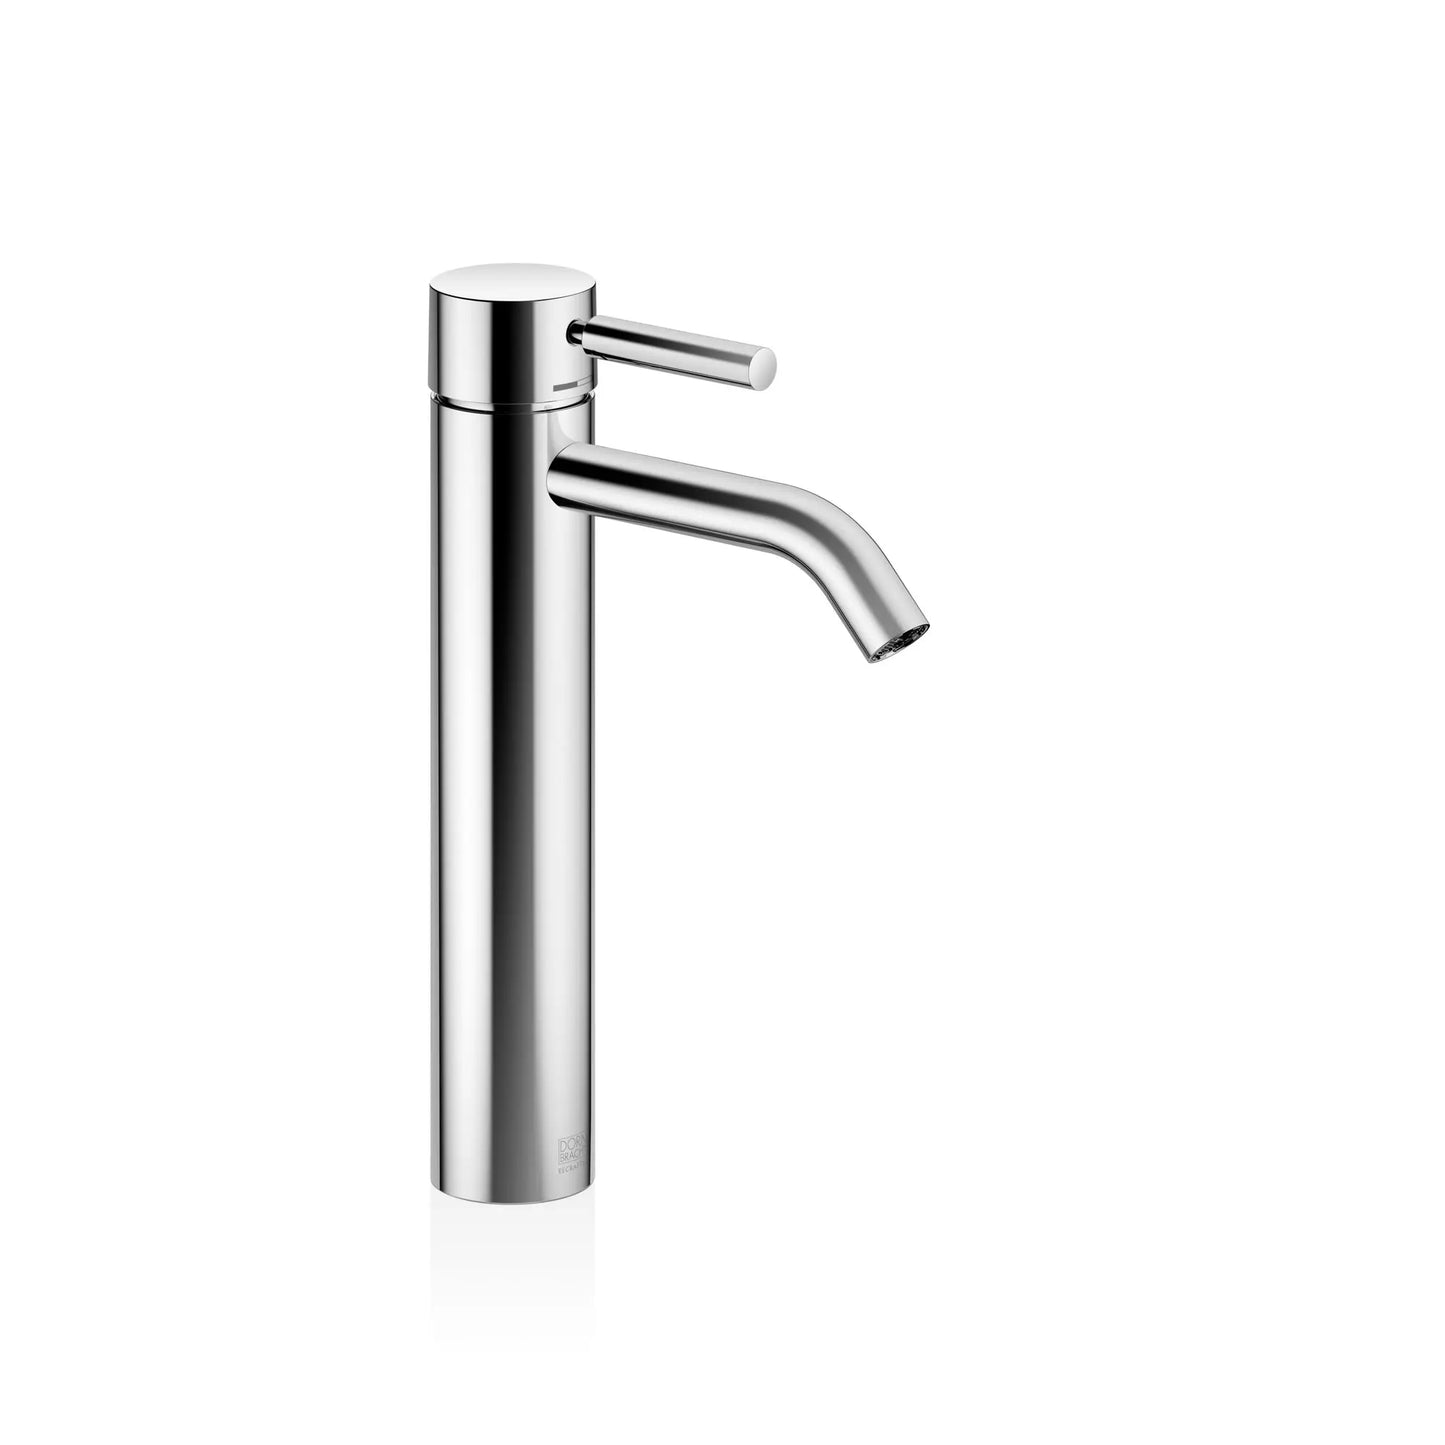 META Single-lever basin mixer with raised base without pop-up waste